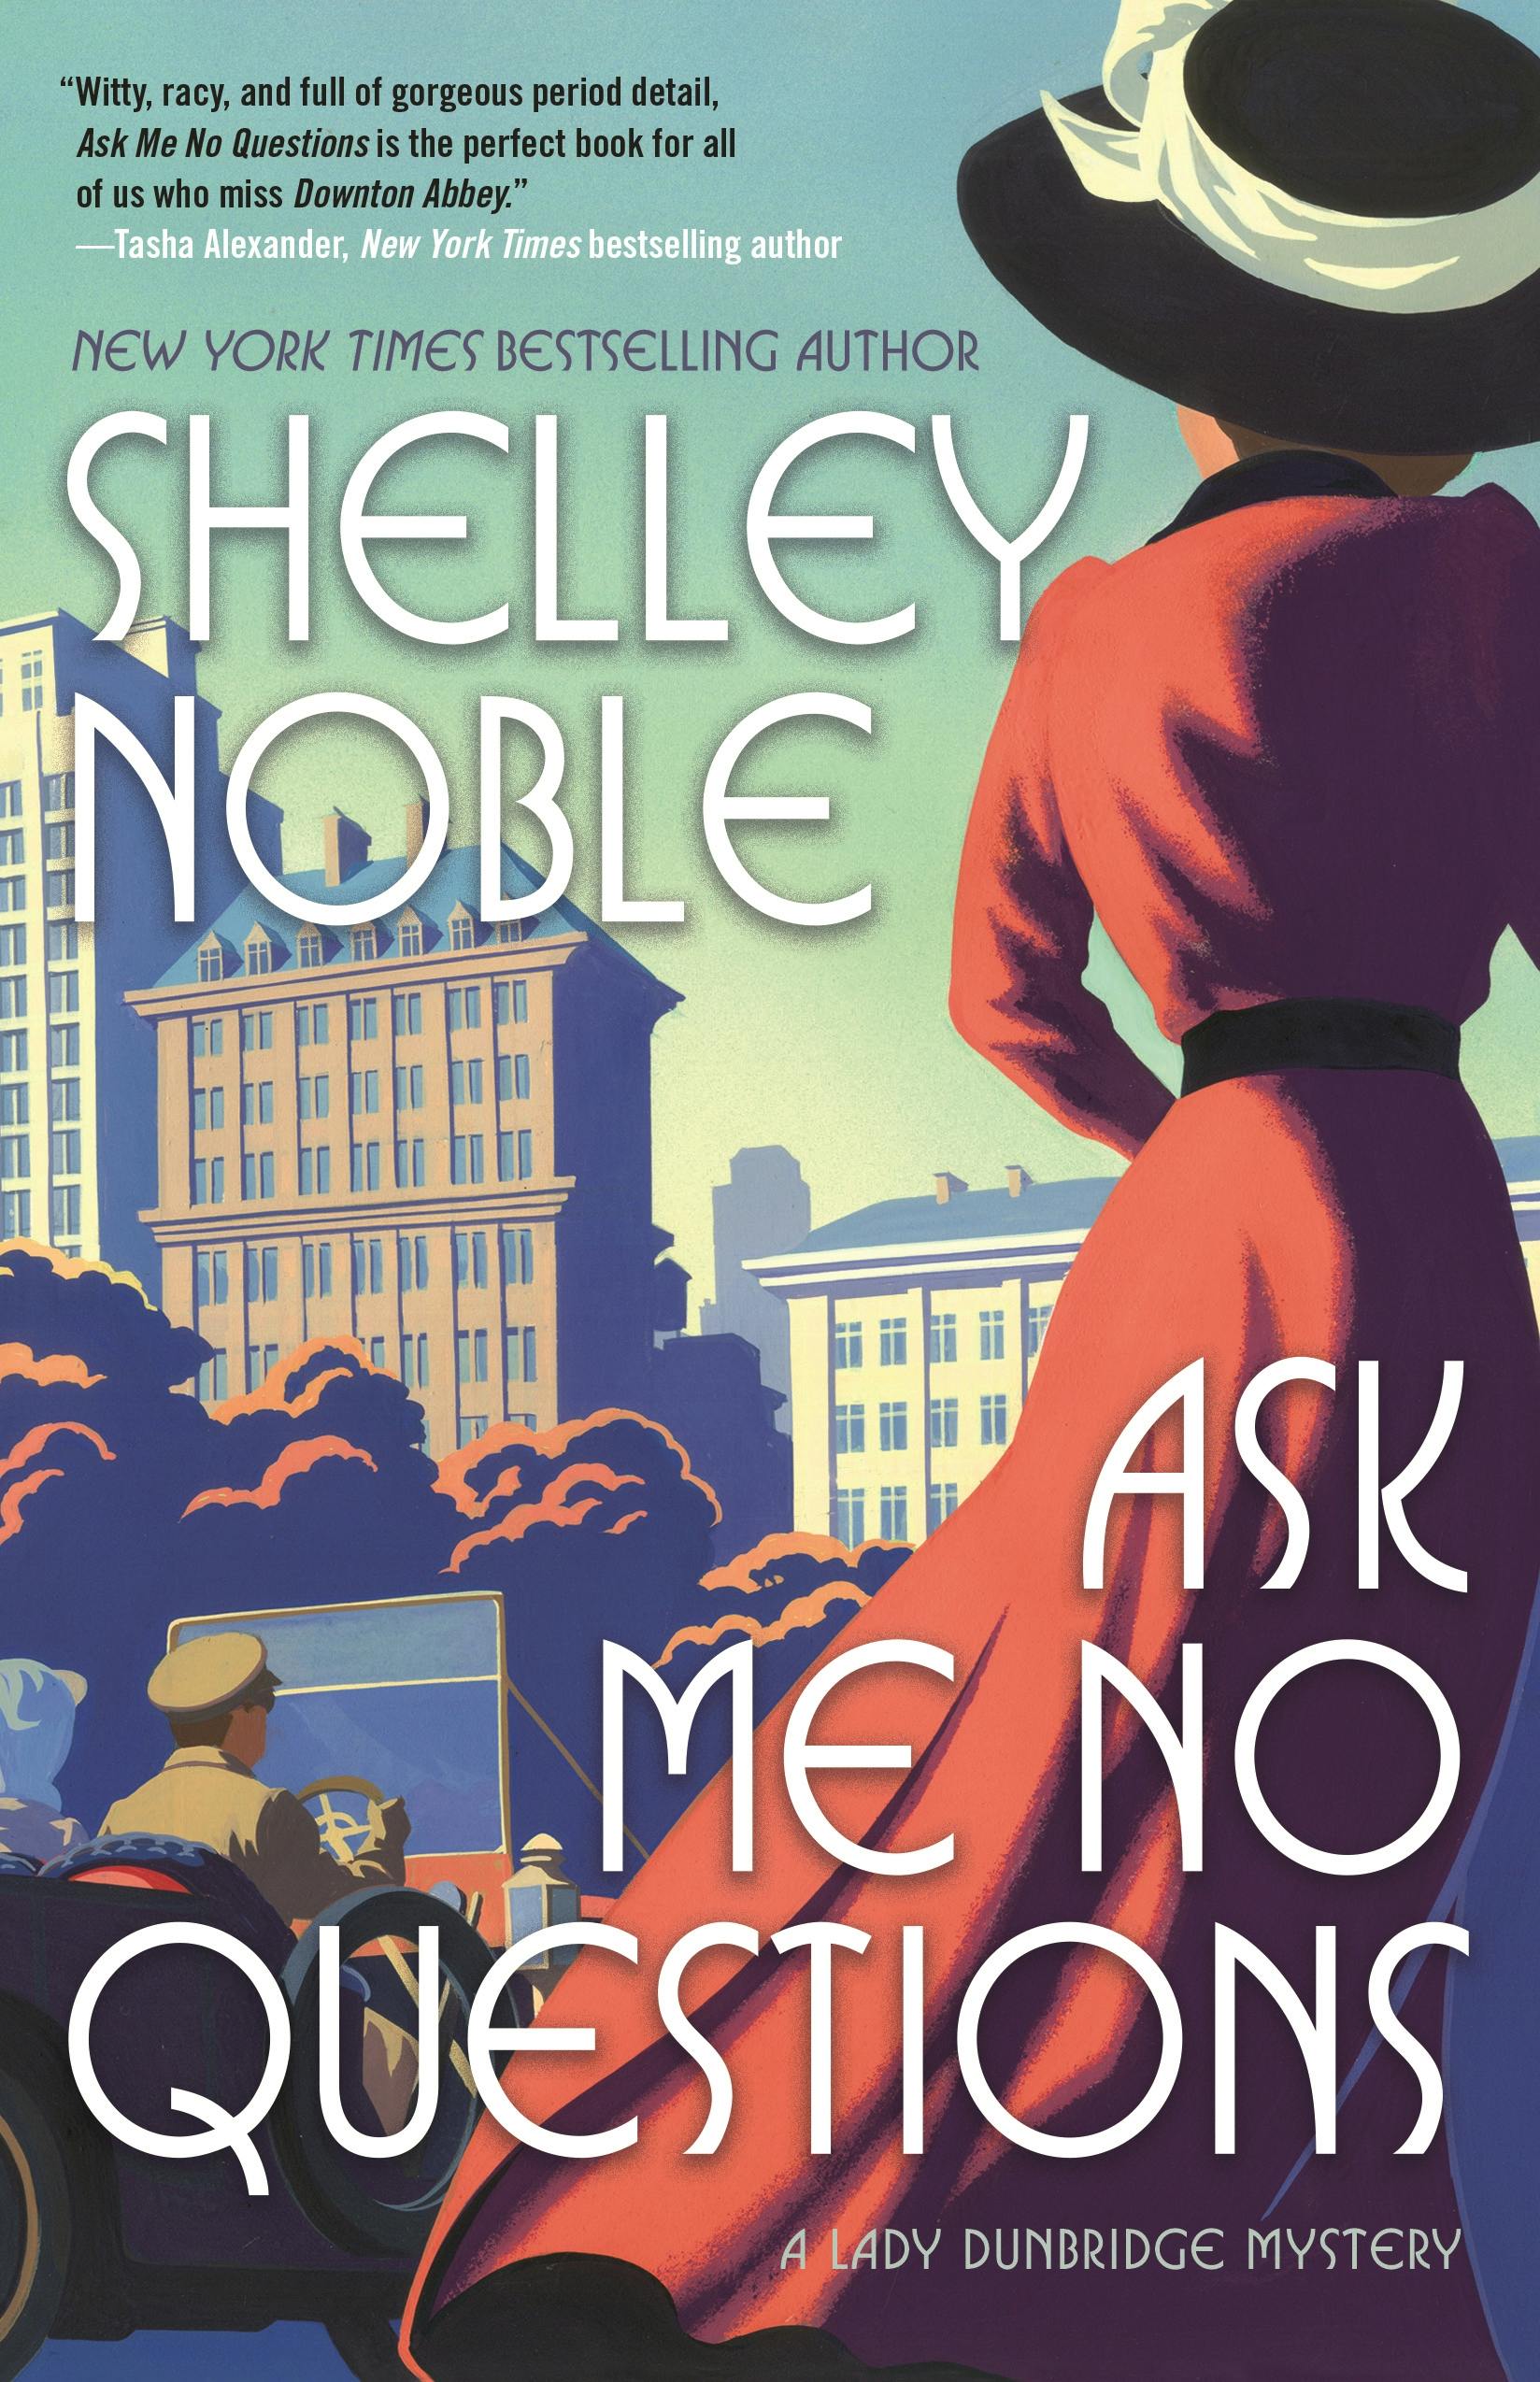 Cover for the book titled as: Ask Me No Questions